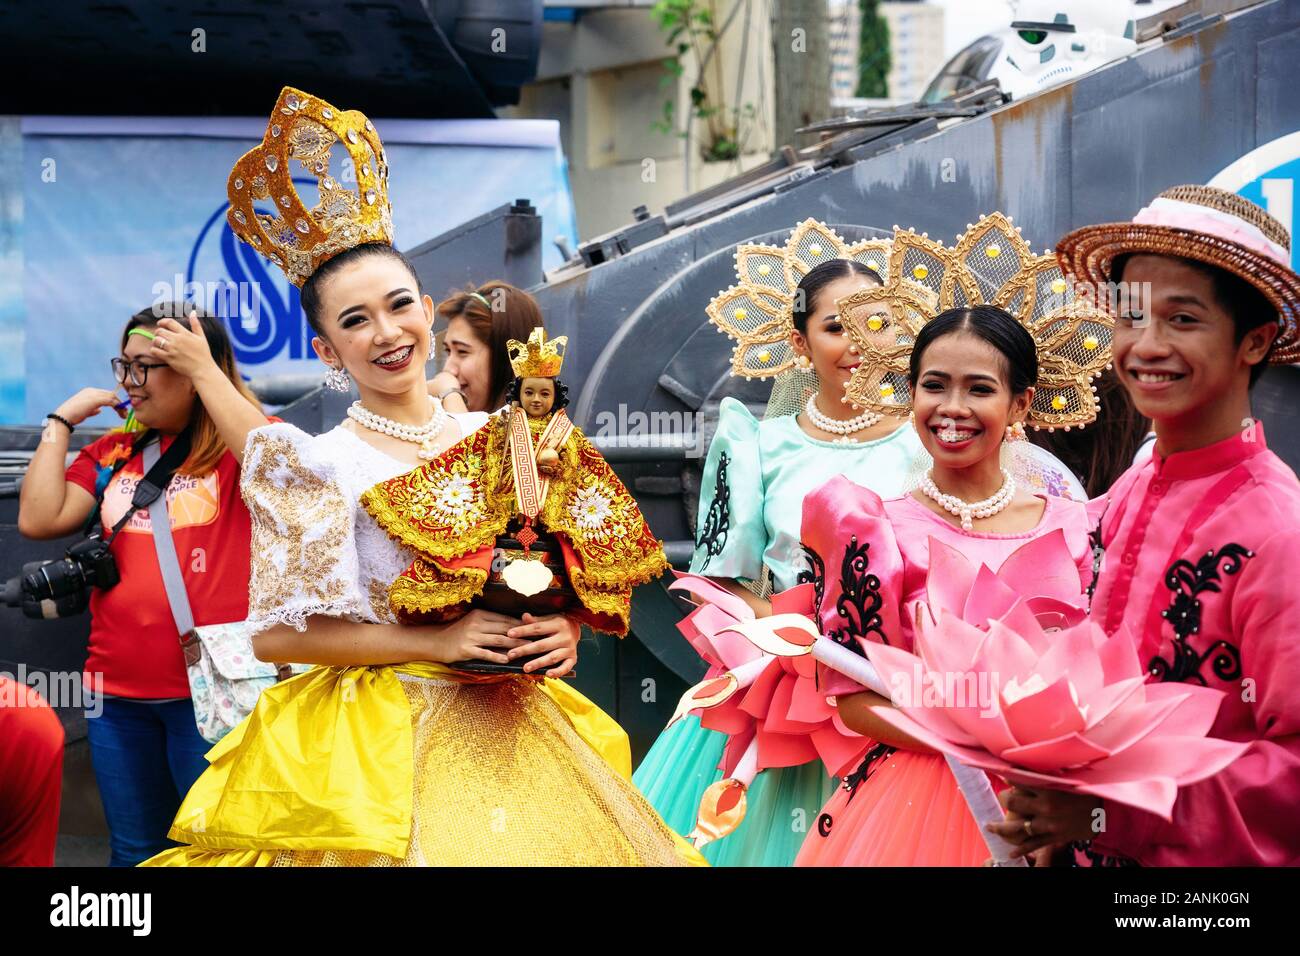 Cebu City , The Philippines - January 20, 2019: Potential Queen of Sinulog. The Sinulog is an annual colorful religious celebration with parade in the Stock Photo